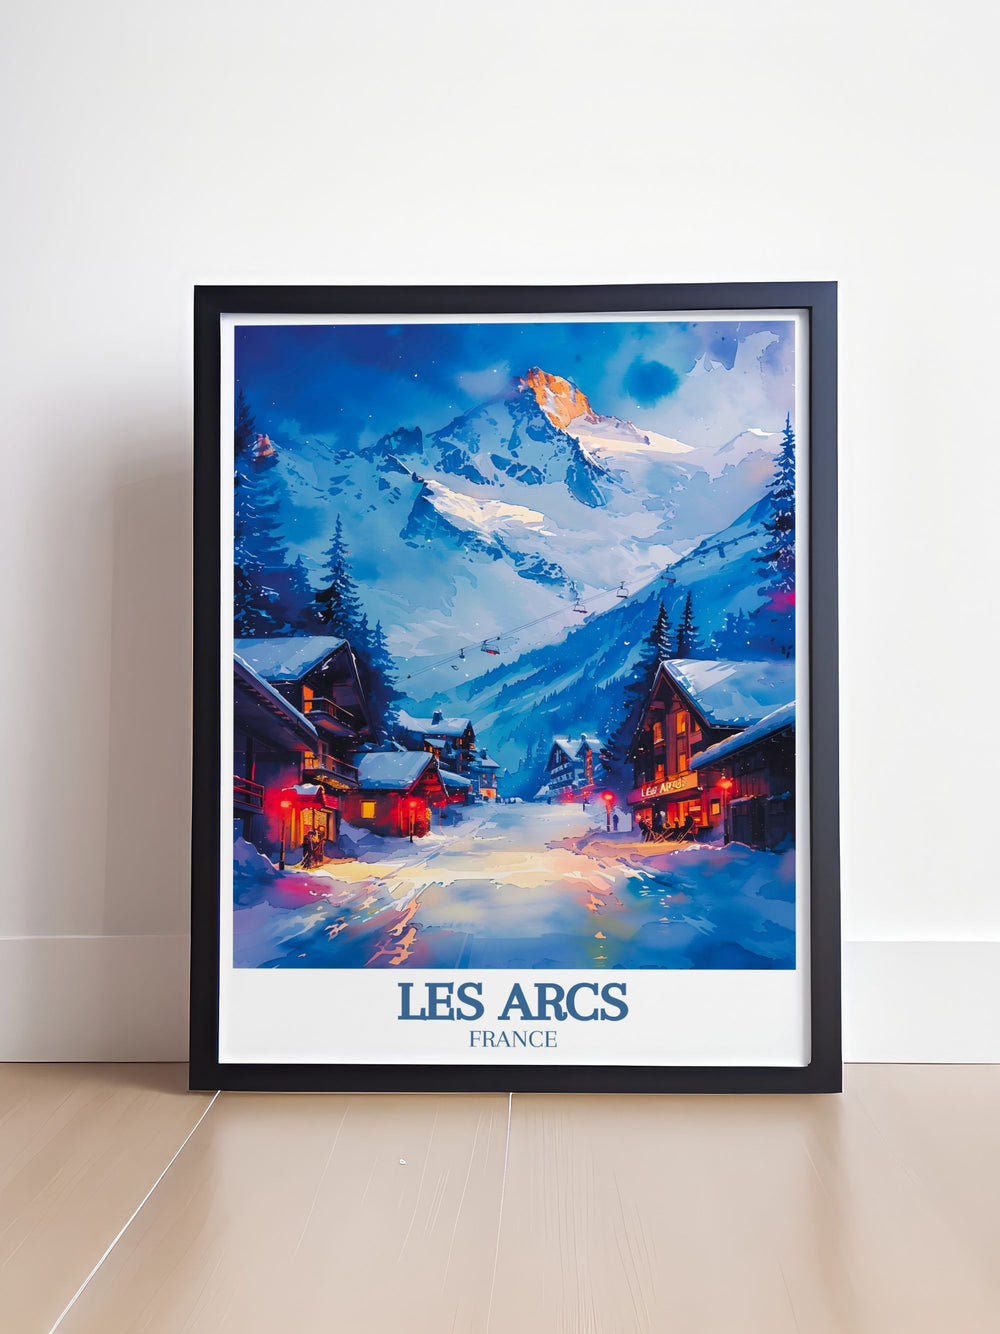 Aiguille Rouge Mont Blanc framed prints showcasing the beauty of Les Arcs perfect for modern art collectors and travel enthusiasts seeking unique skiing posters